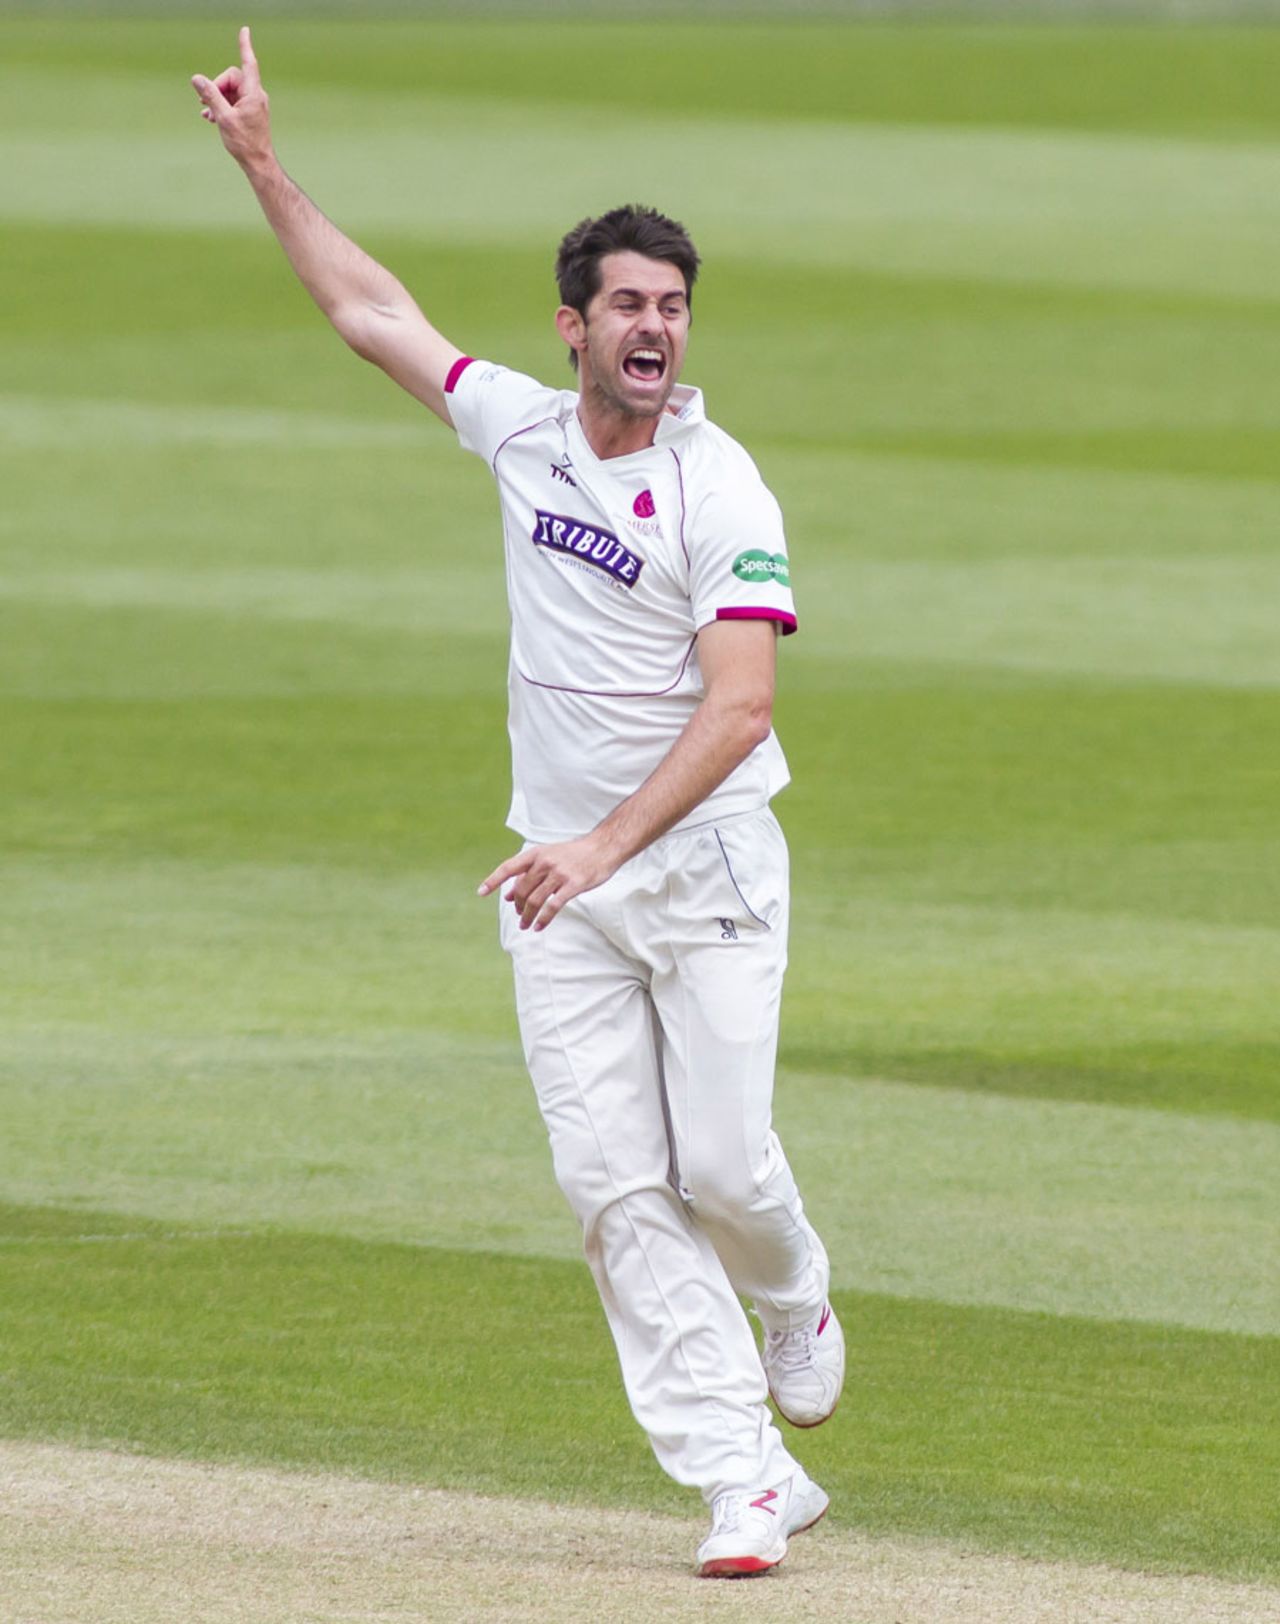 Tim Groenewald finished with a five-wicket haul, Surrey v Somerset, Specsavers County Championship, Division One, The Oval, 2nd day, April 25, 2016